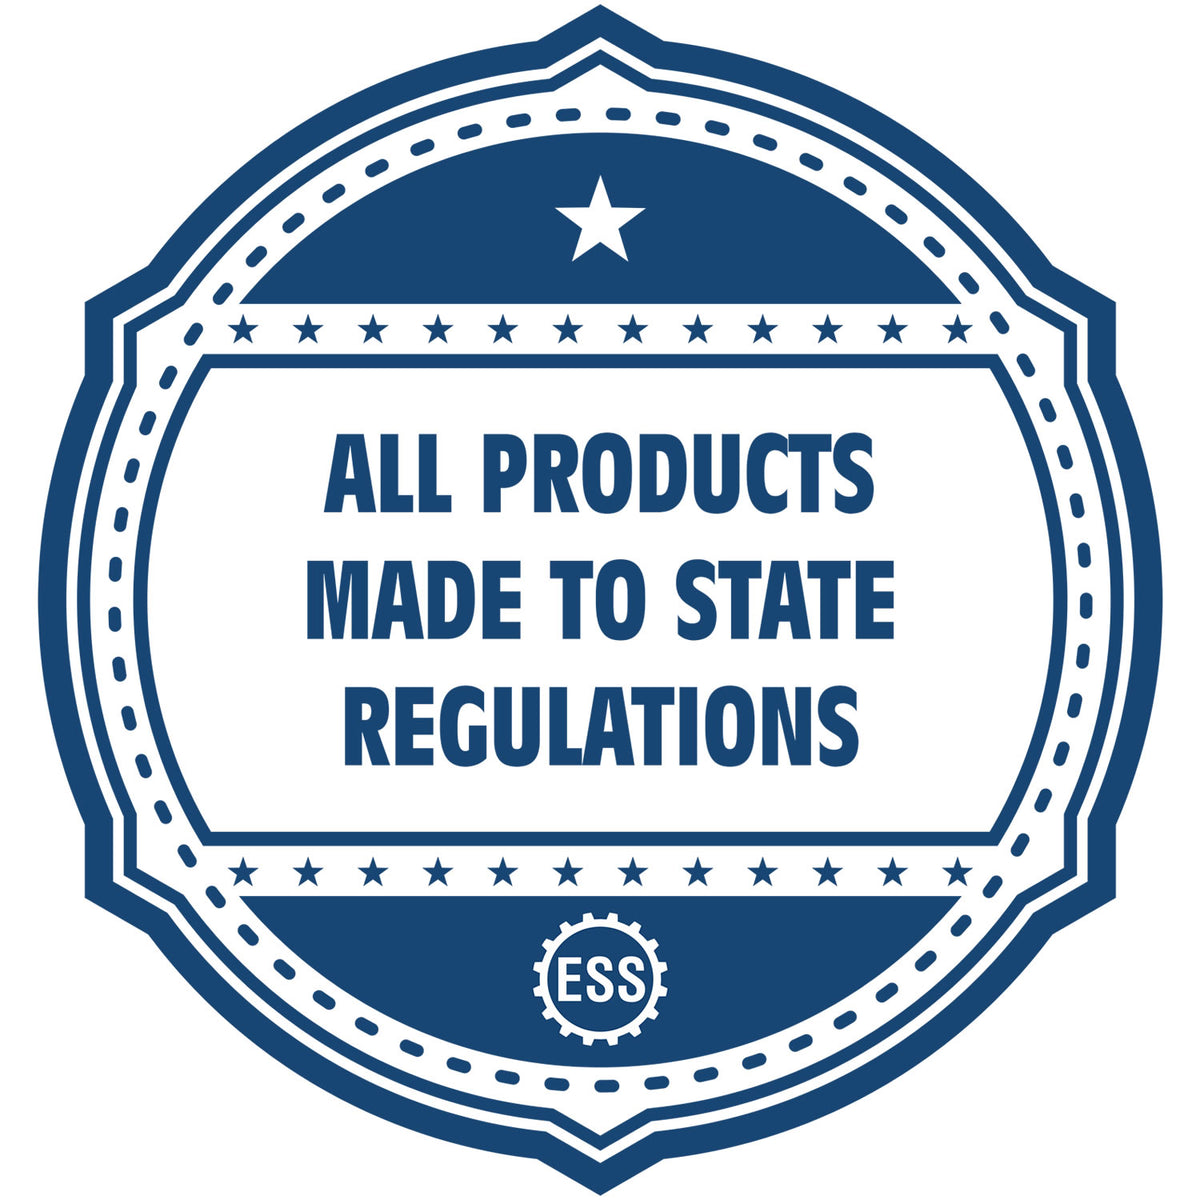 An icon or badge element for the Extended Long Reach Tennessee Architect Seal Embosser showing that this product is made in compliance with state regulations.